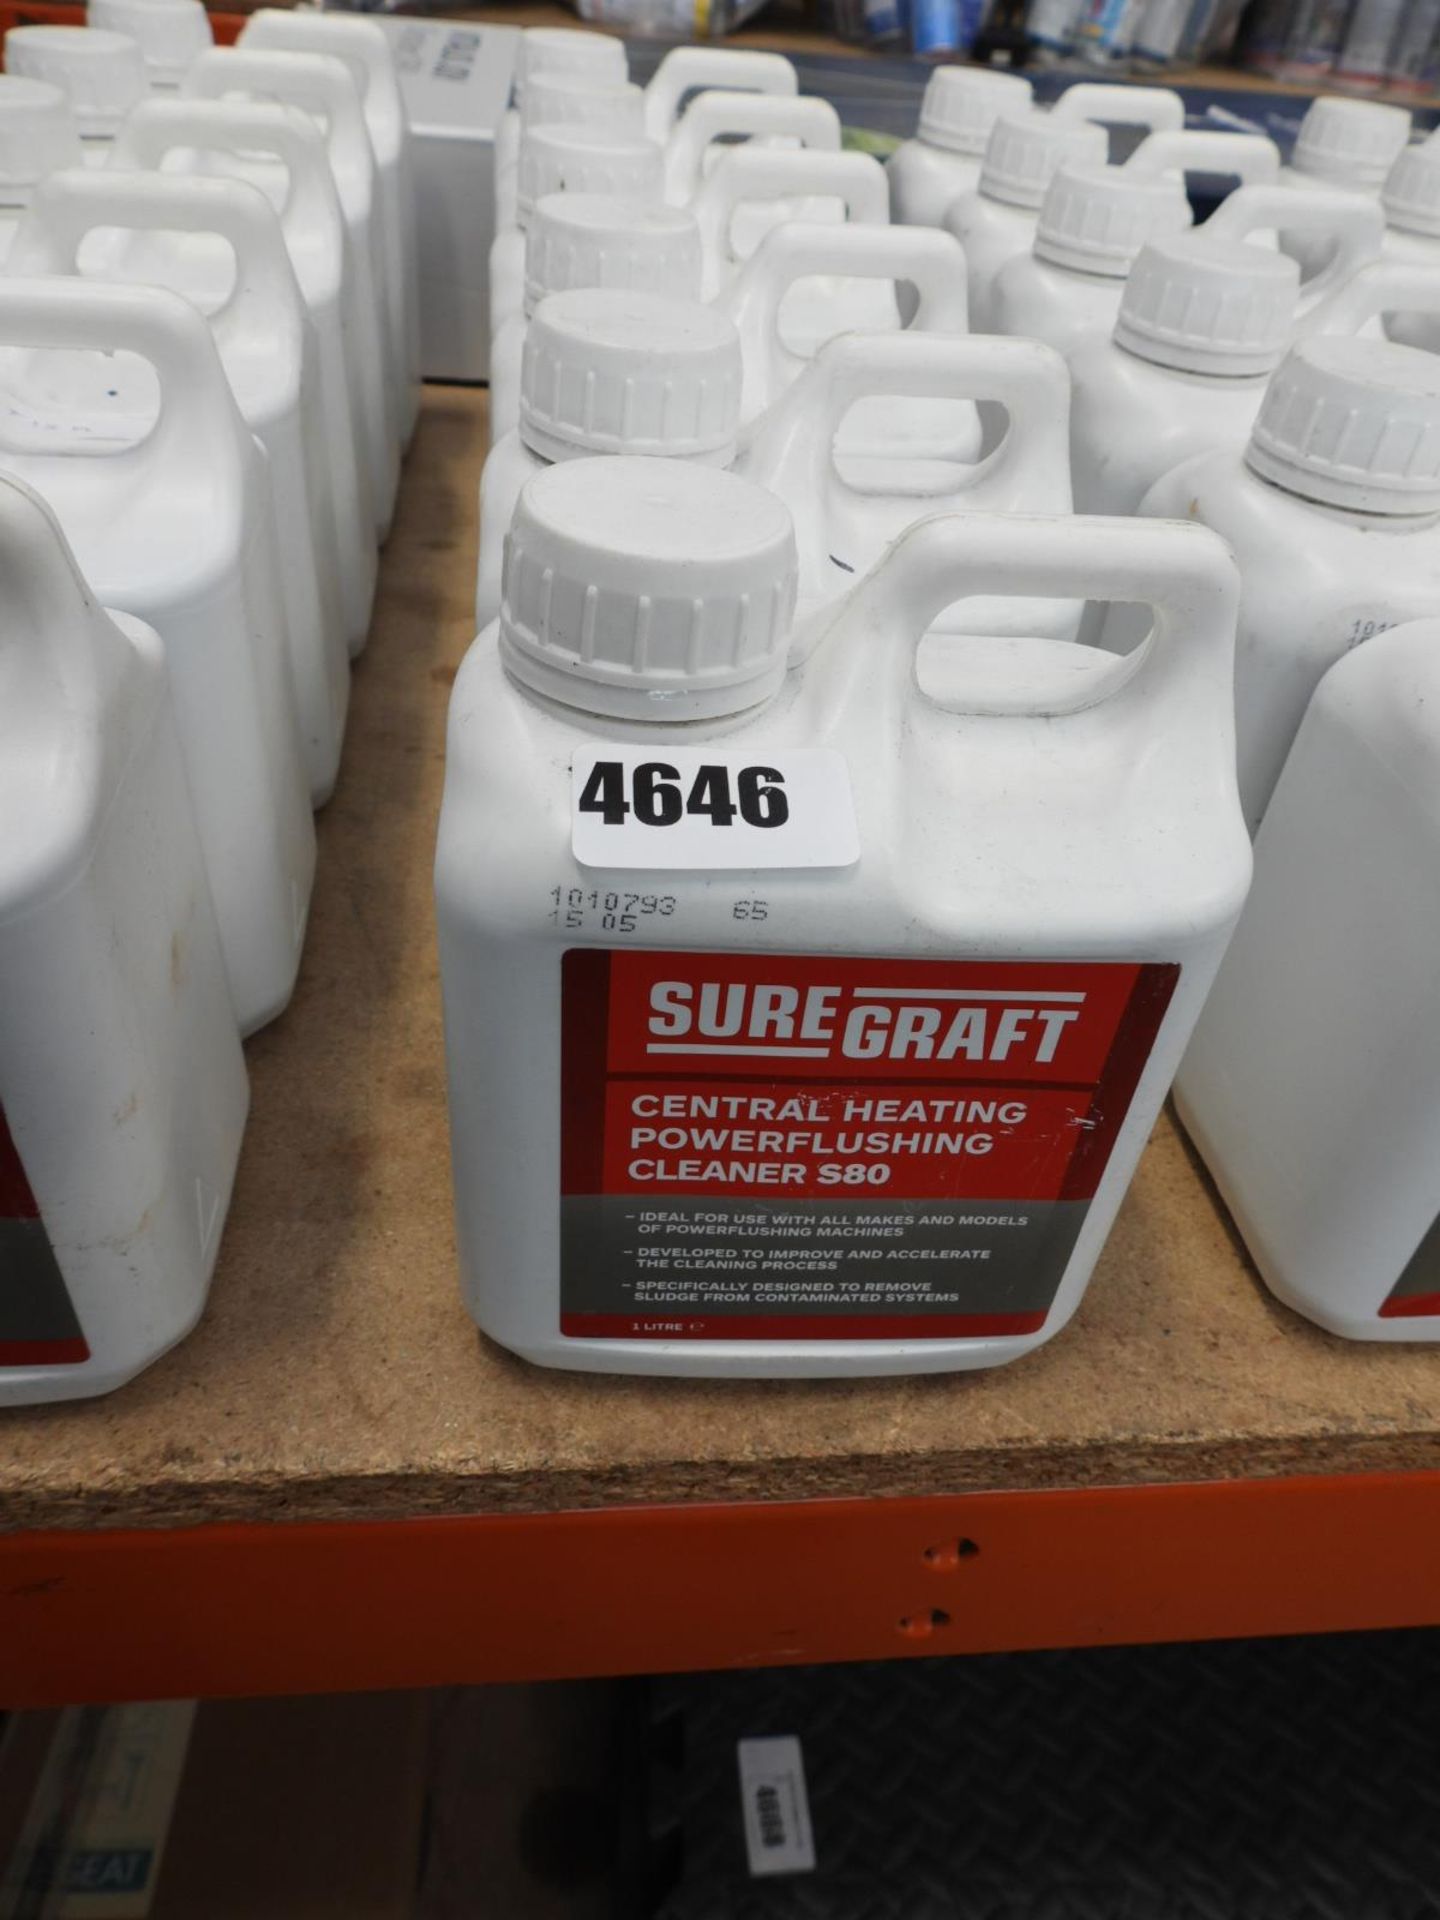 6 tubs of suregraft central heating power flushing cleaner